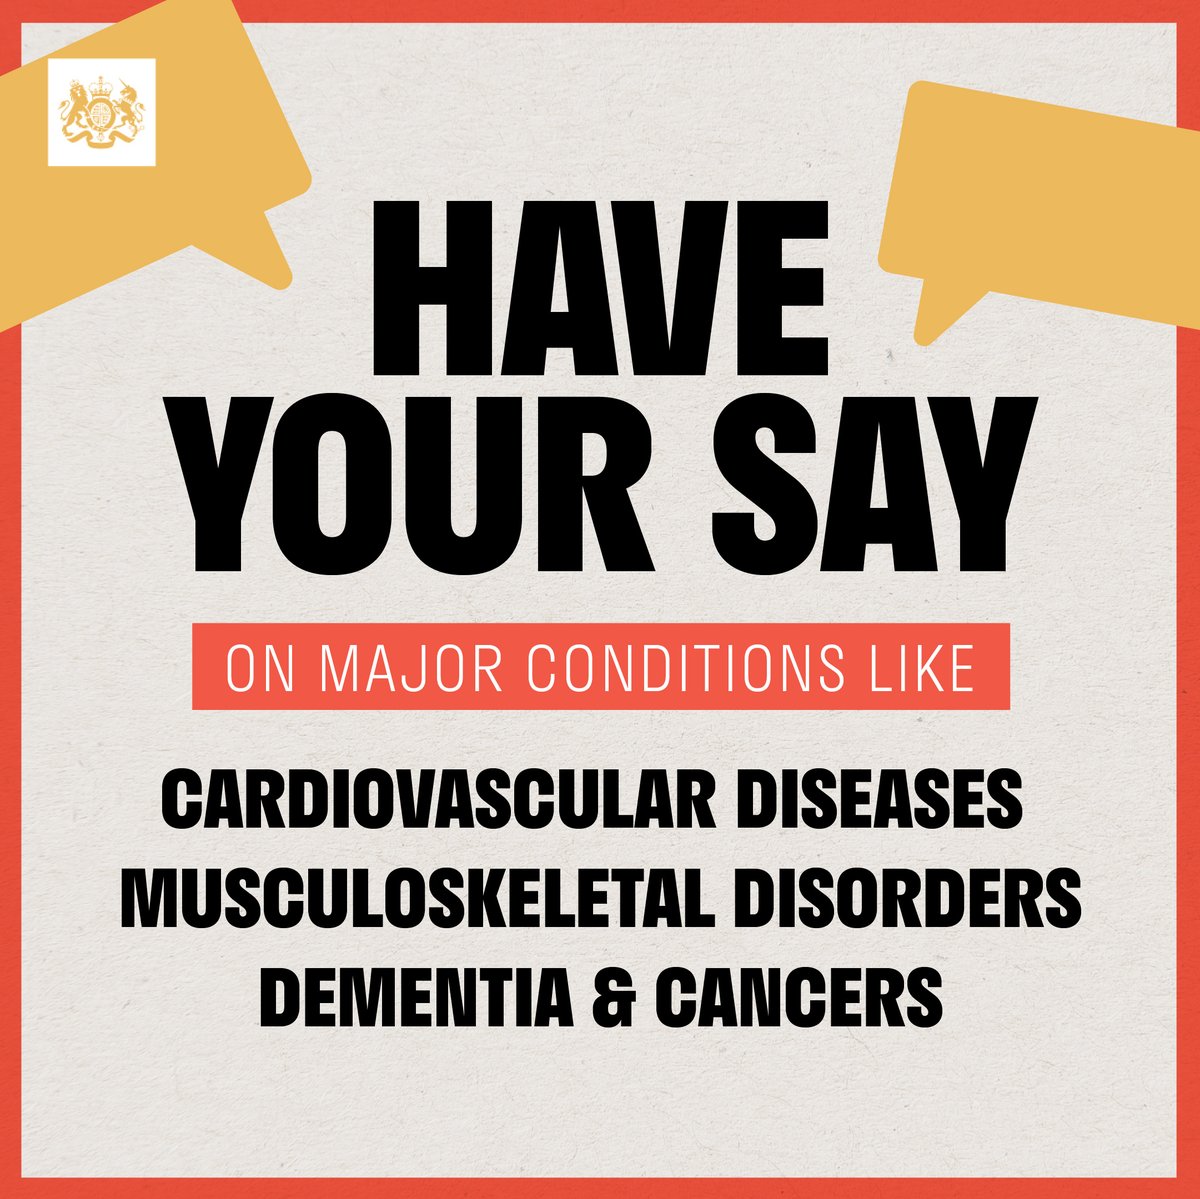 Have your say to help shape @DHSCgovuk’s strategy on tackling major conditions such as dementia & cardiovascular diseases. They want to hear from: ✅ Patients & carers ✅ Scientists & researchers ✅ Campaigners & health professionals Respond here: gov.uk/government/con…